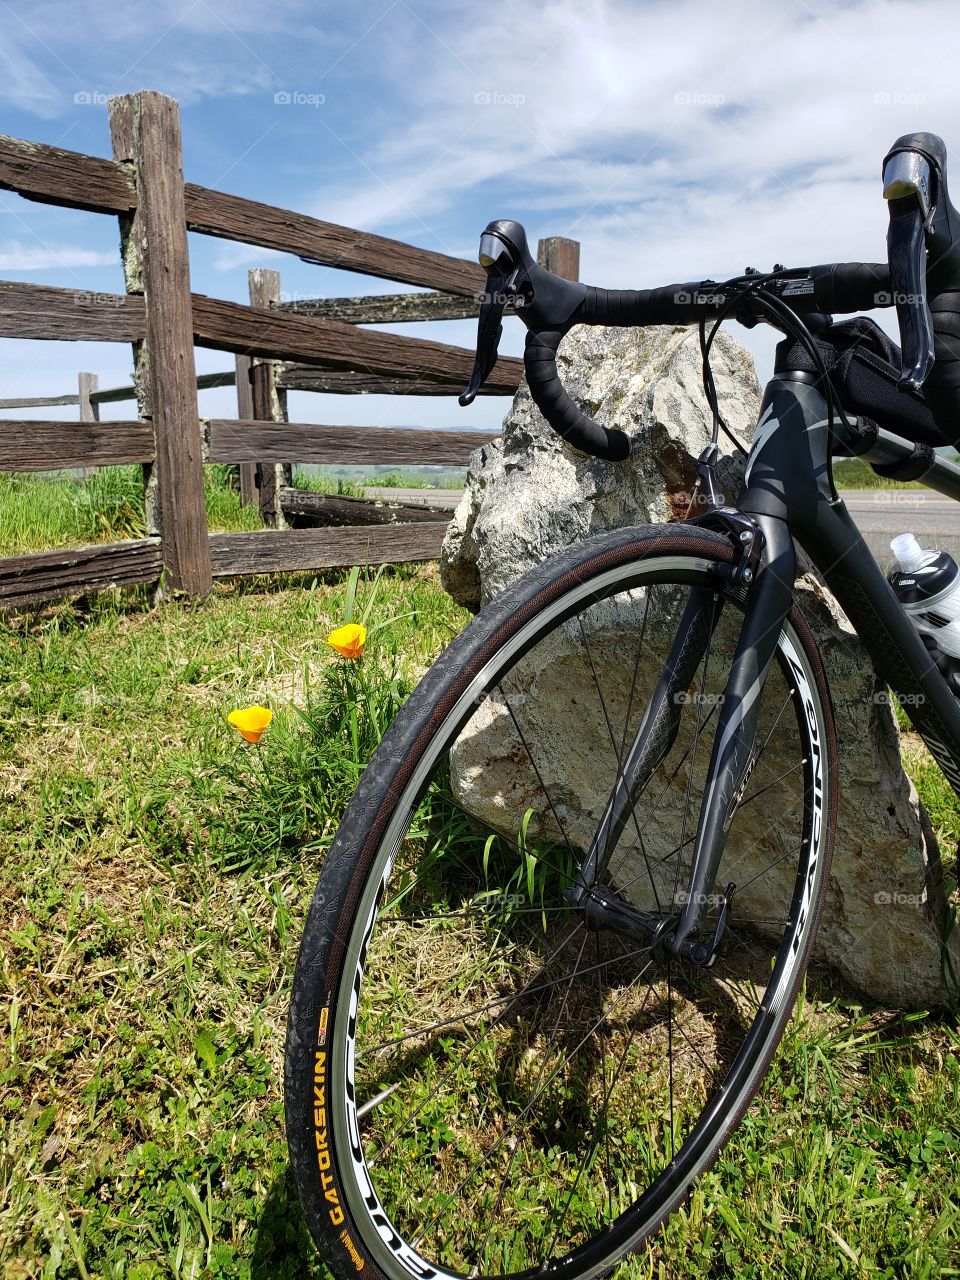 Bike and 2 poppies